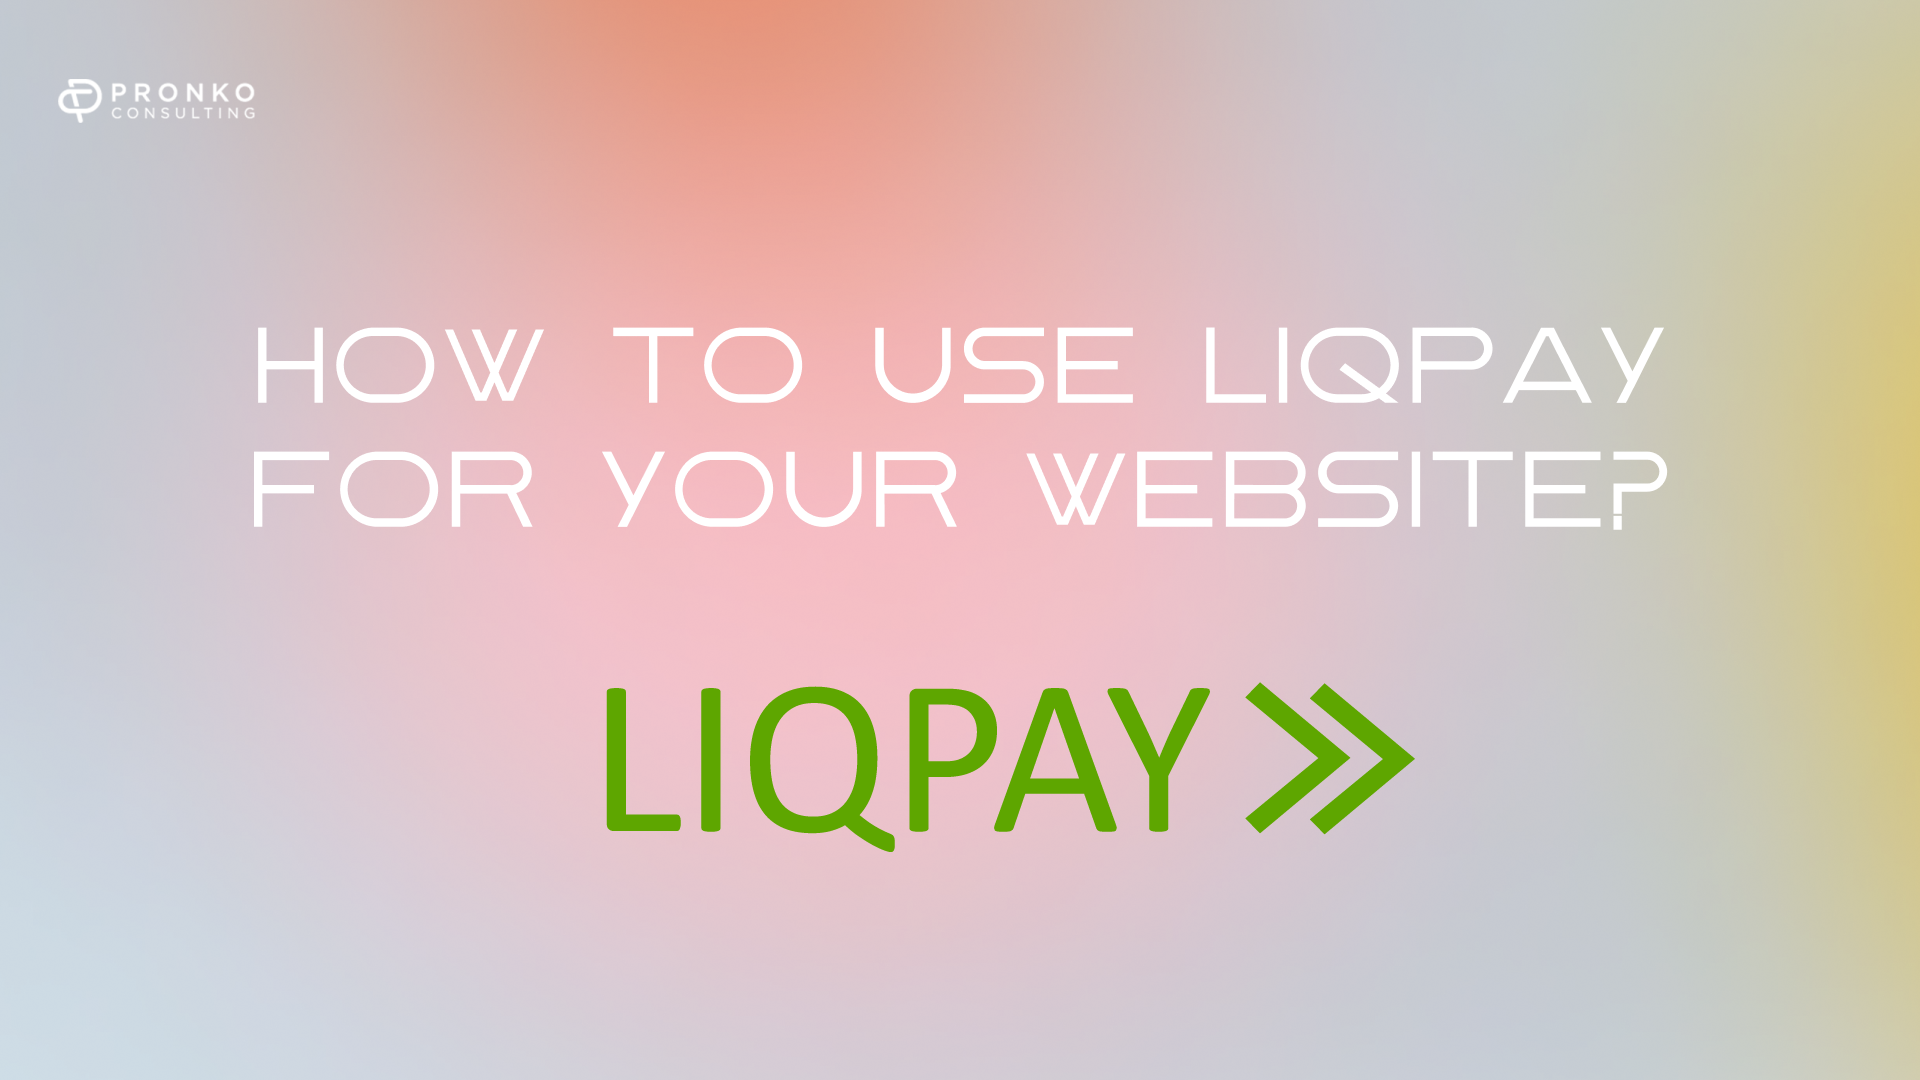 Make the payment easier: set up LiqPay on your website